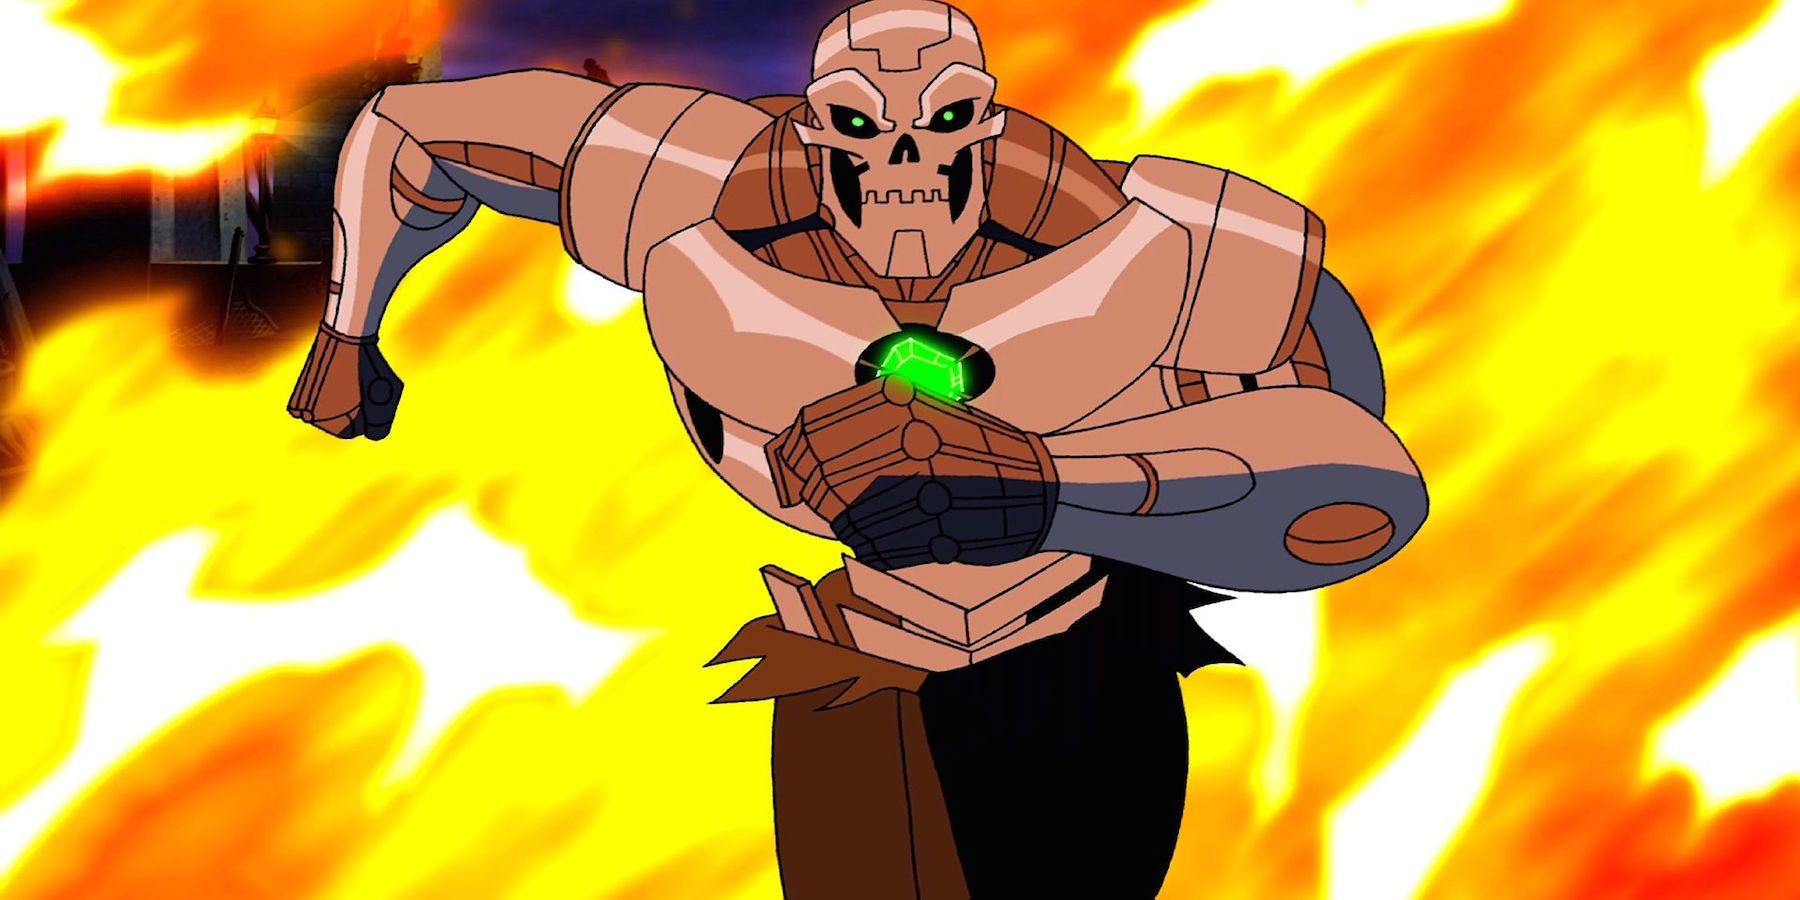 Metallo from an animated DC project.